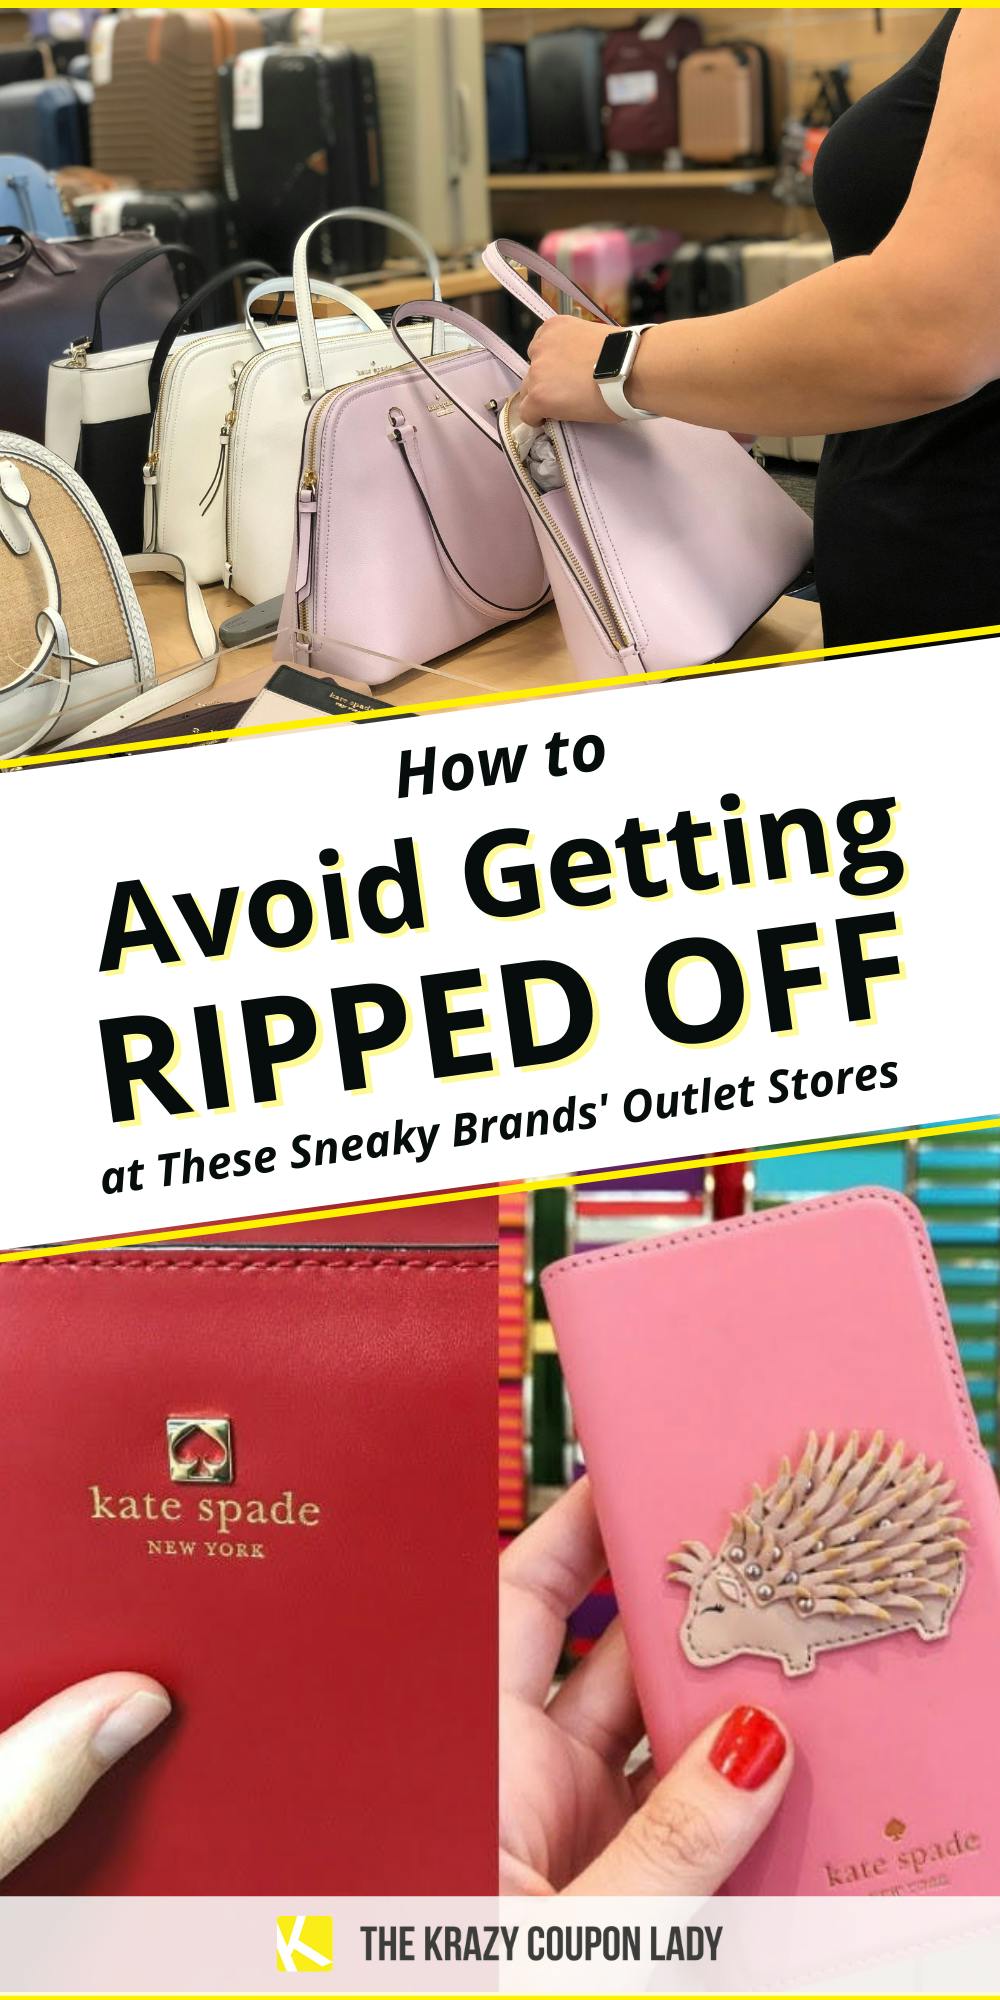 How to Avoid Getting Ripped Off at Outlet Stores - The Krazy Coupon Lady